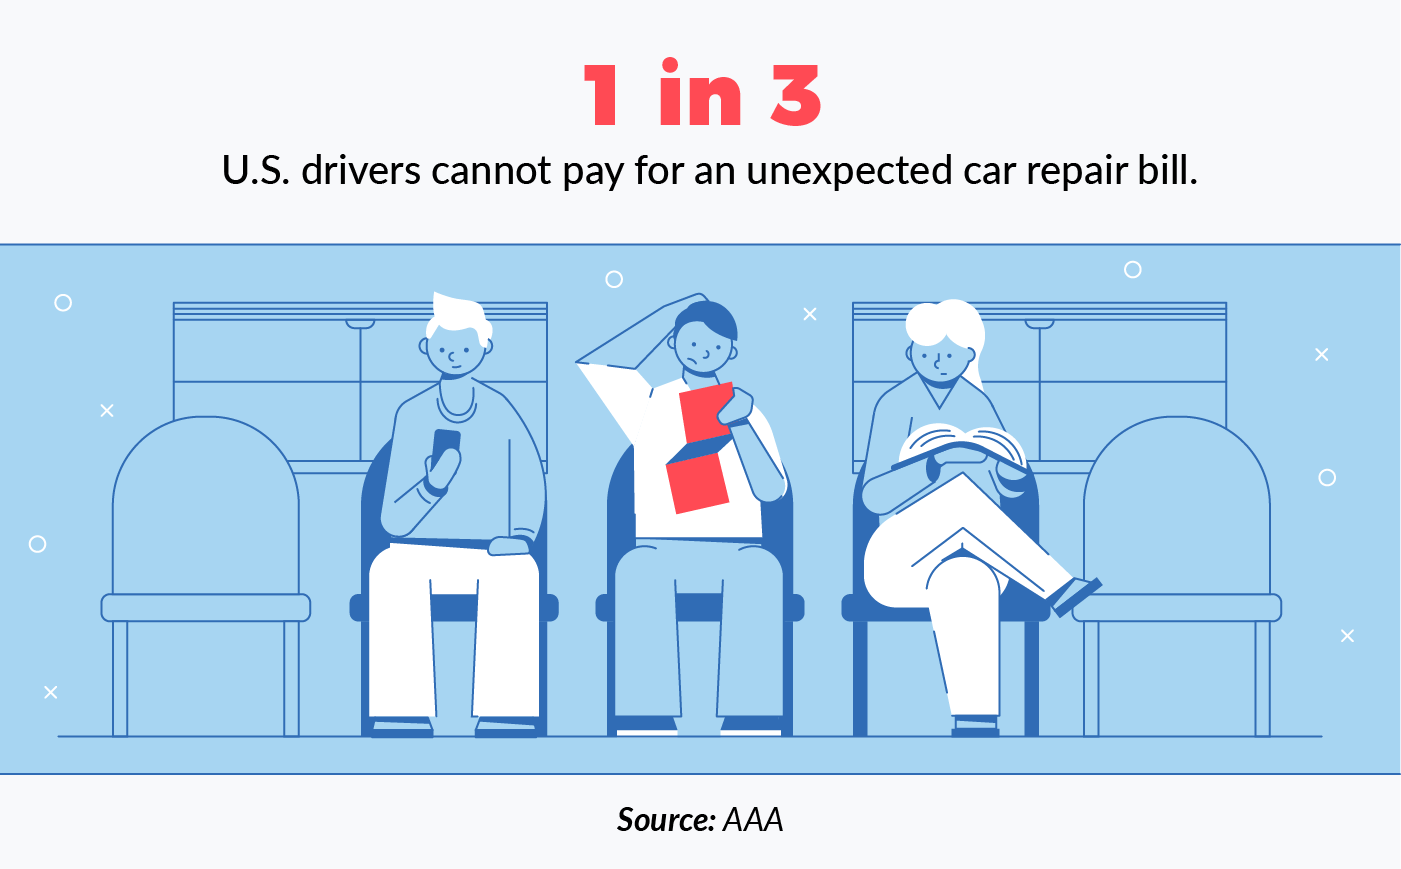 1 in 3 U.S. drivers cannot afford an unexpected car bill